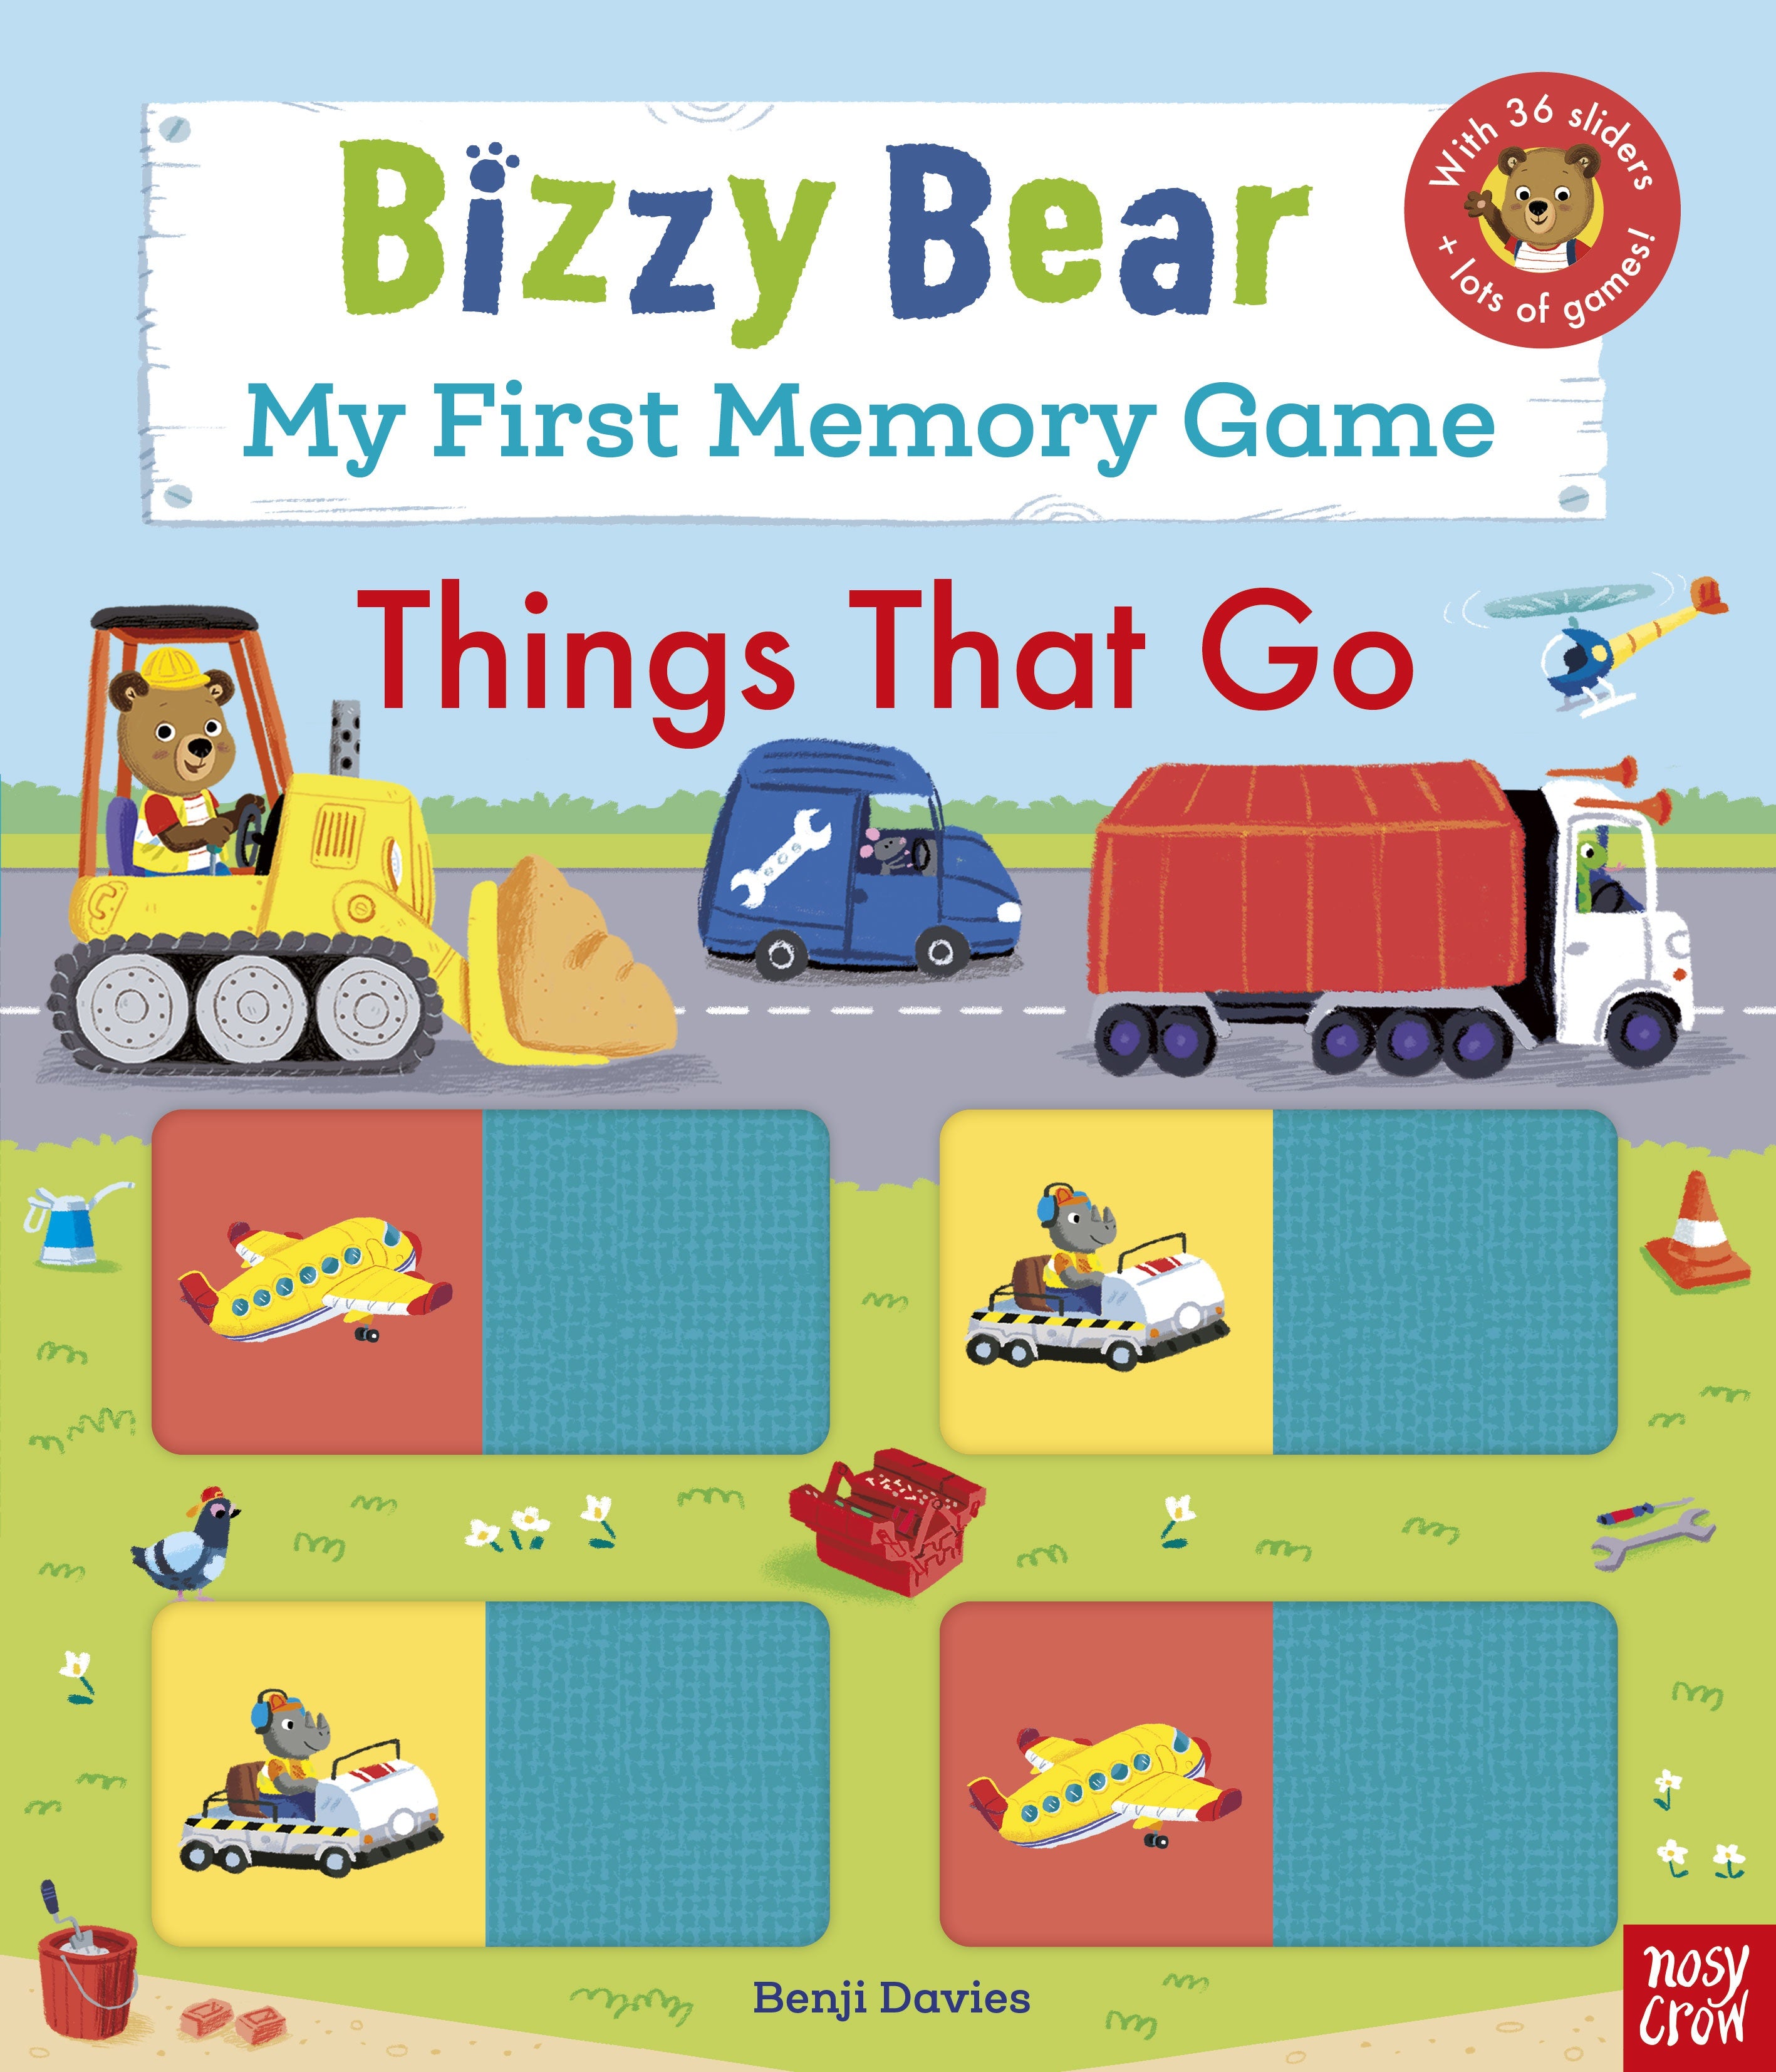 Bizzy Bear: My First Memory Game Book - Things That Go